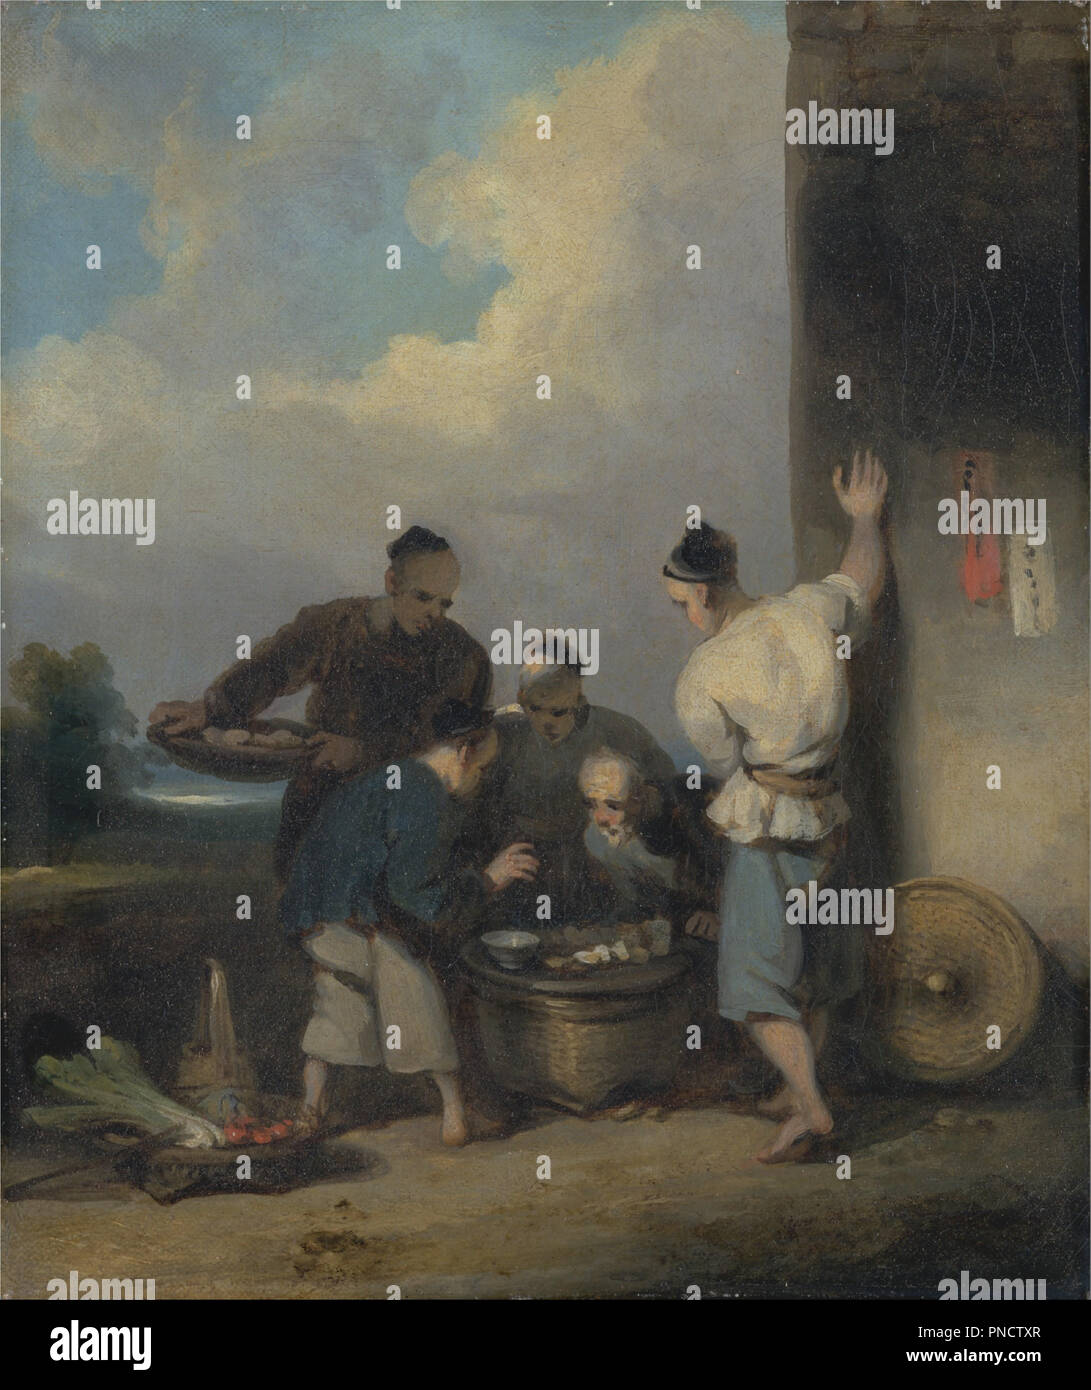 Coolies Round the Food Vendor's Stall. Date/Period: After 1825. Painting. Oil on canvas. Height: 241 mm (9.48 in); Width: 206 mm (8.11 in). Author: George Chinnery. Stock Photo